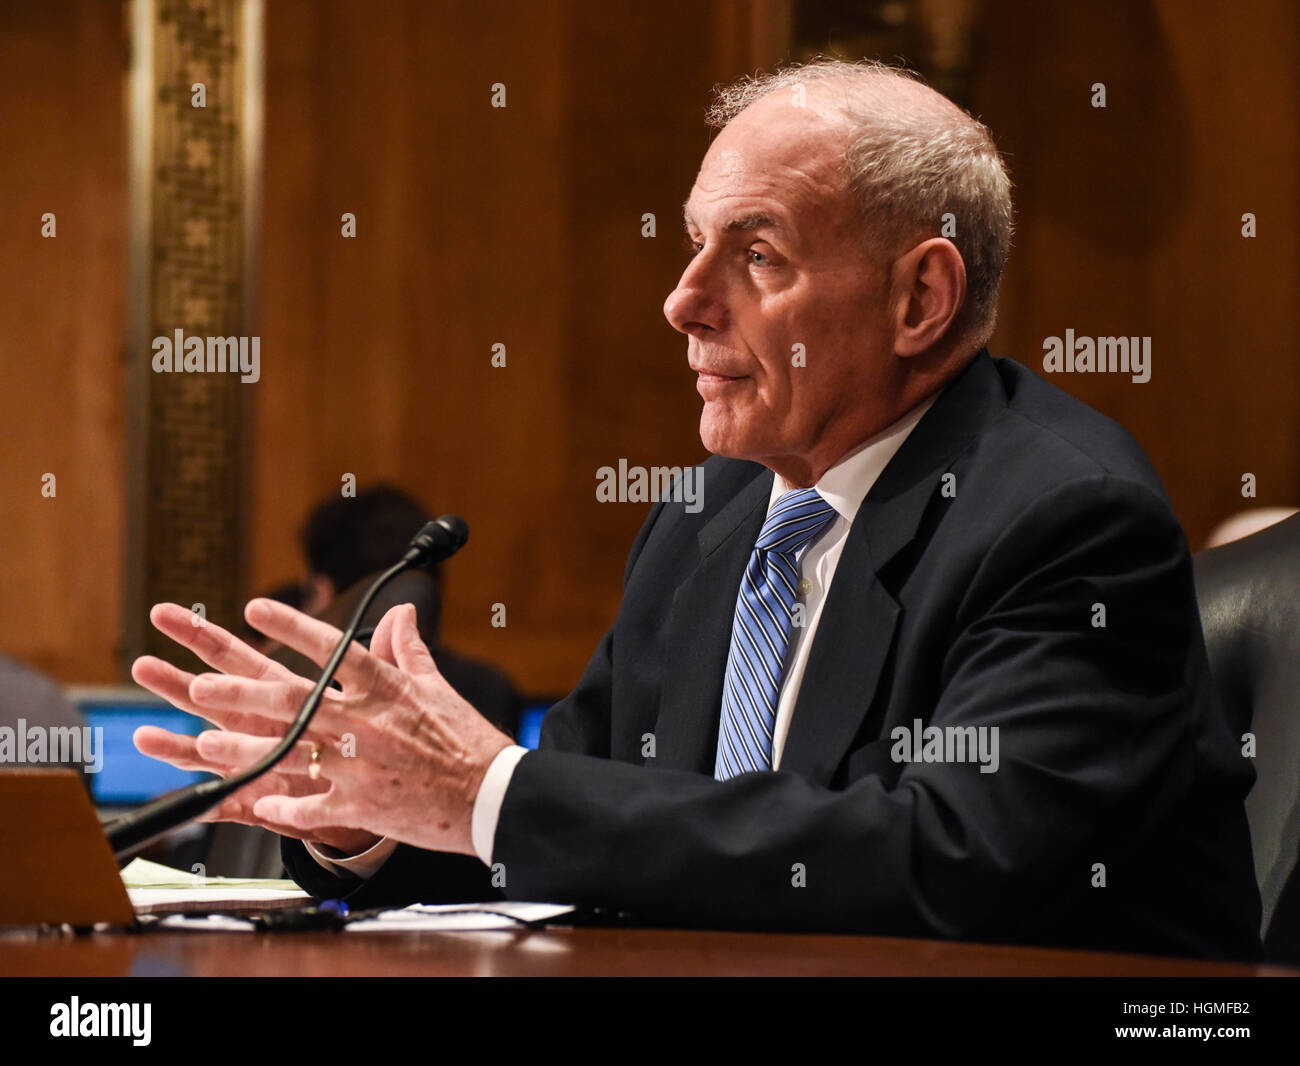 Washington, DC, USA. 10th January, 2017. Retired Marine Corps Gen. John Kelly testifies at the Senate Homeland Security and Governmental Affairs Committee hearing on his nomination to be Secretary of the Department of Homeland Security on Capitol Hill in Washington D.C, USA. © Bao Dandan/Xinhua/Alamy Live News Stock Photo